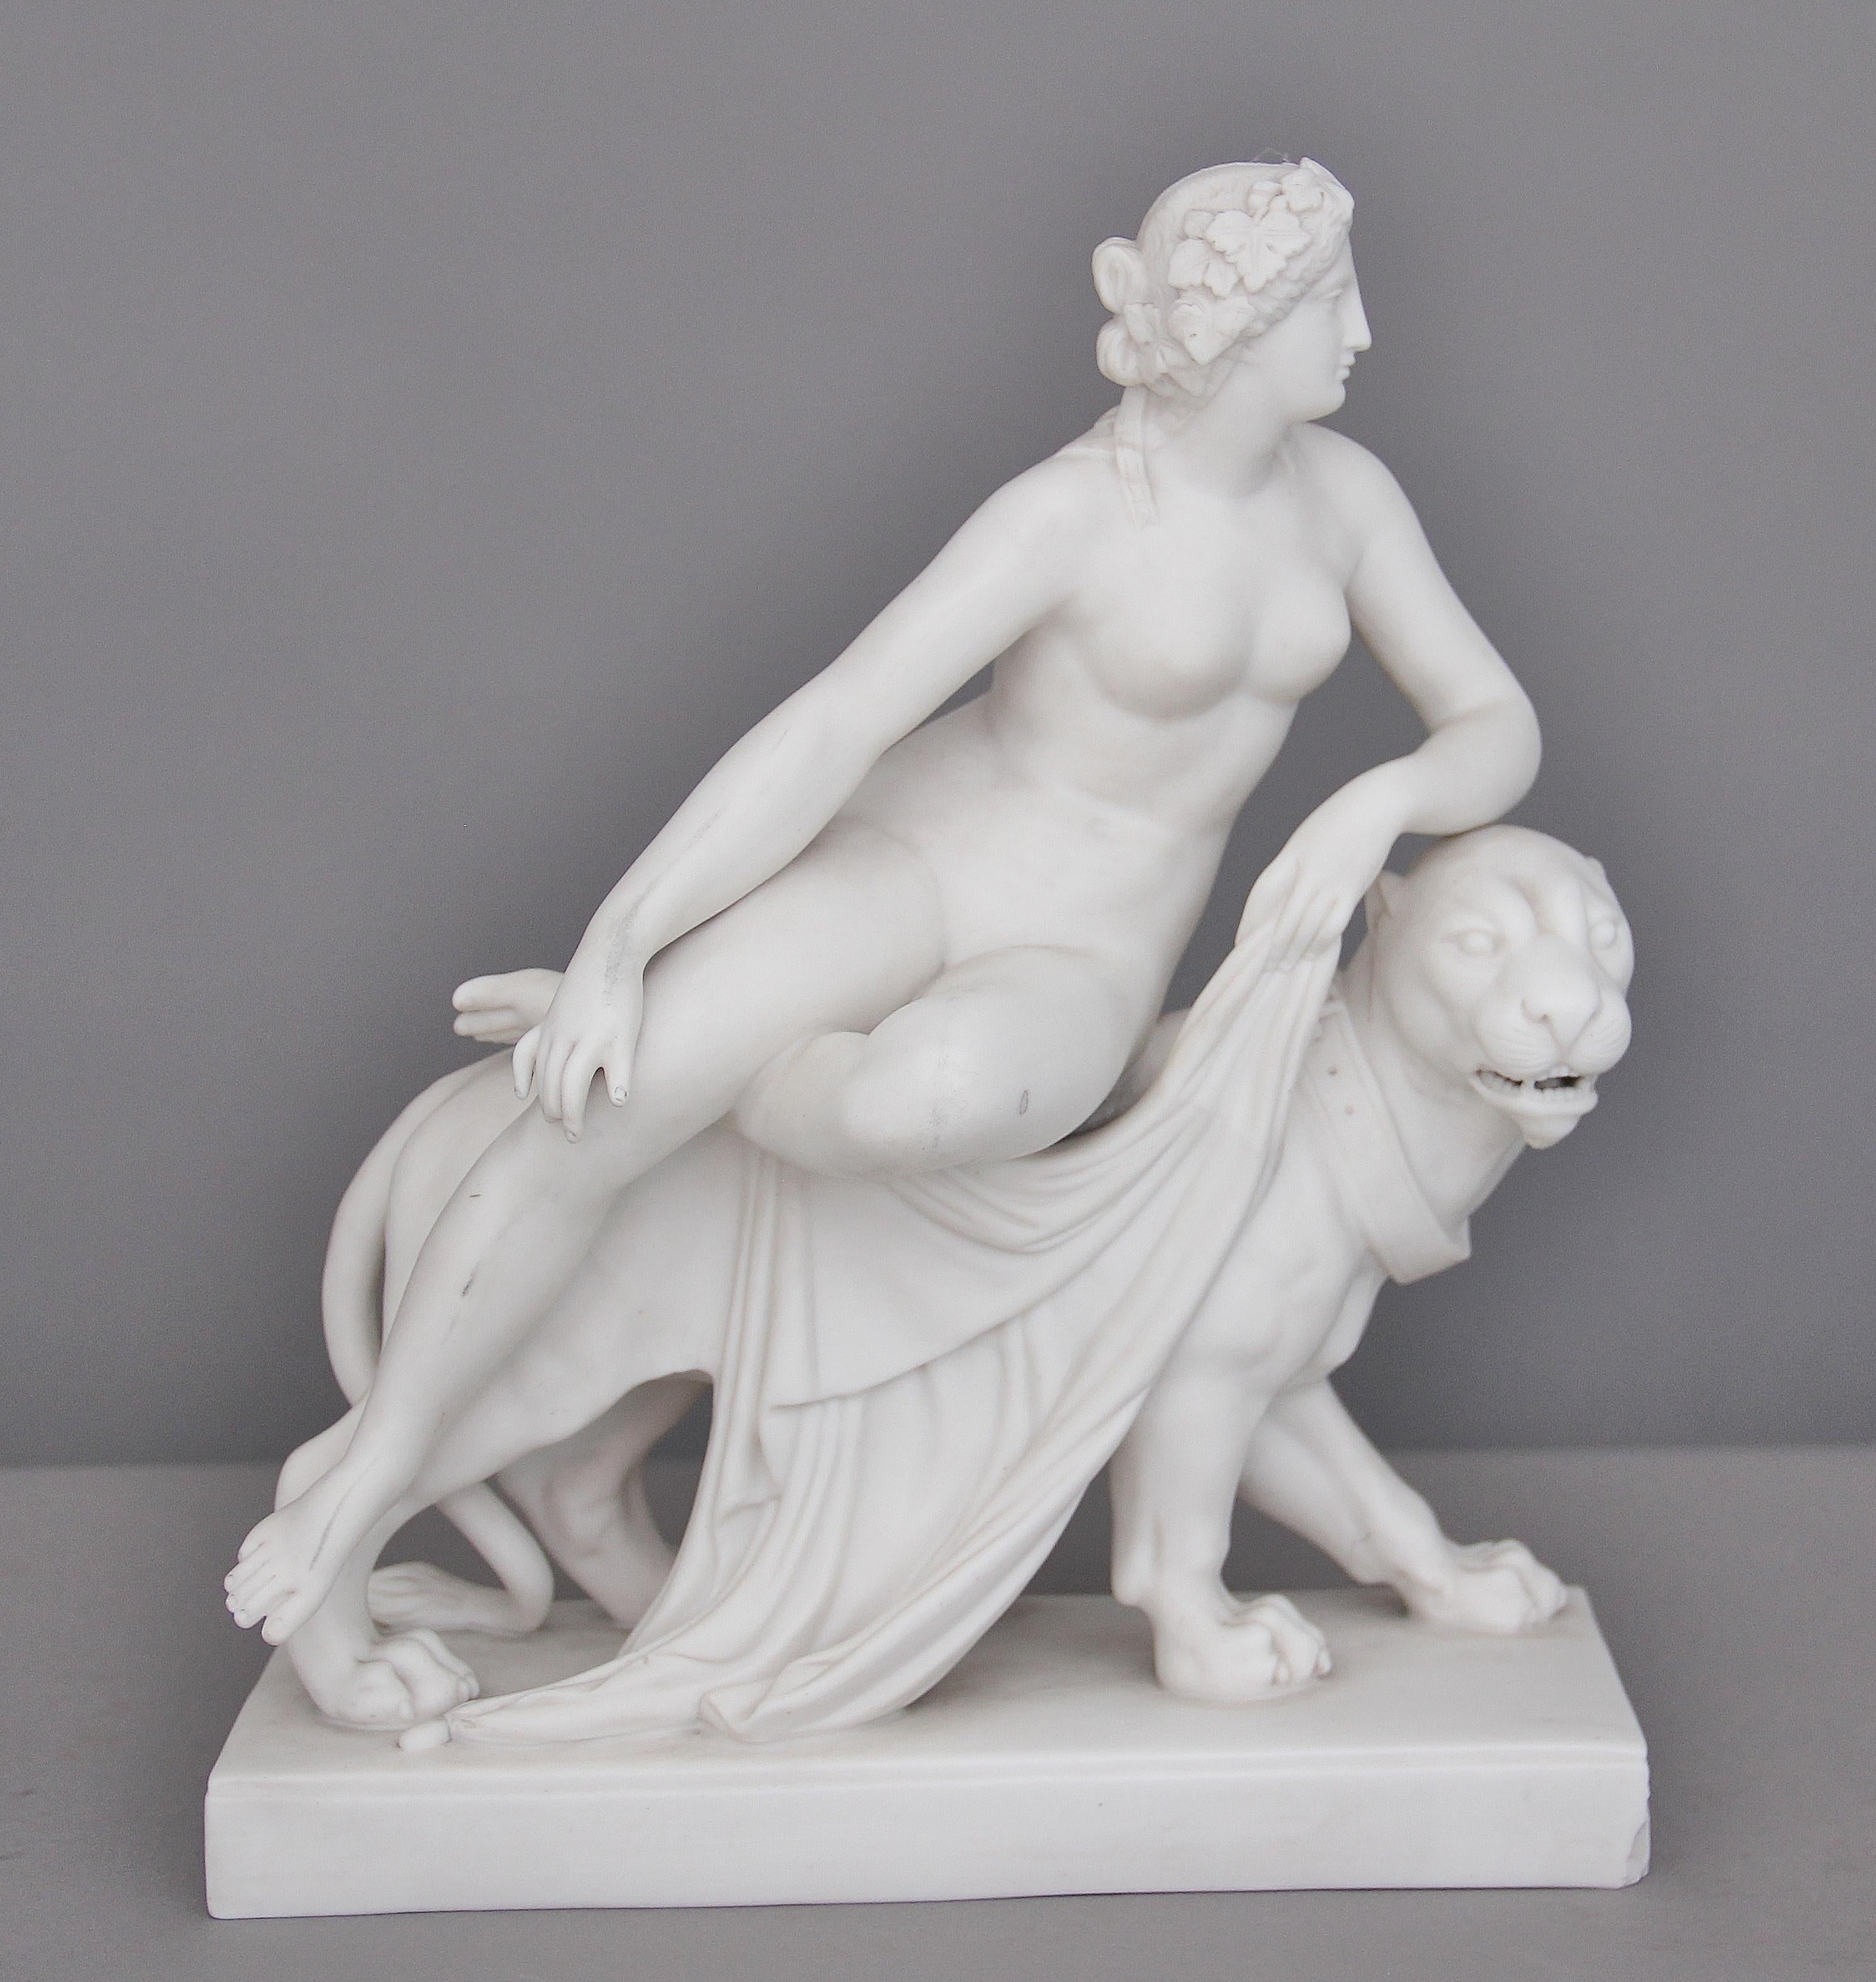 19th Century parian classical figure of Ariadne and the panther, with nude female figure of riding on the panthers back, supported on a rectangular base.  Circa 1860.
